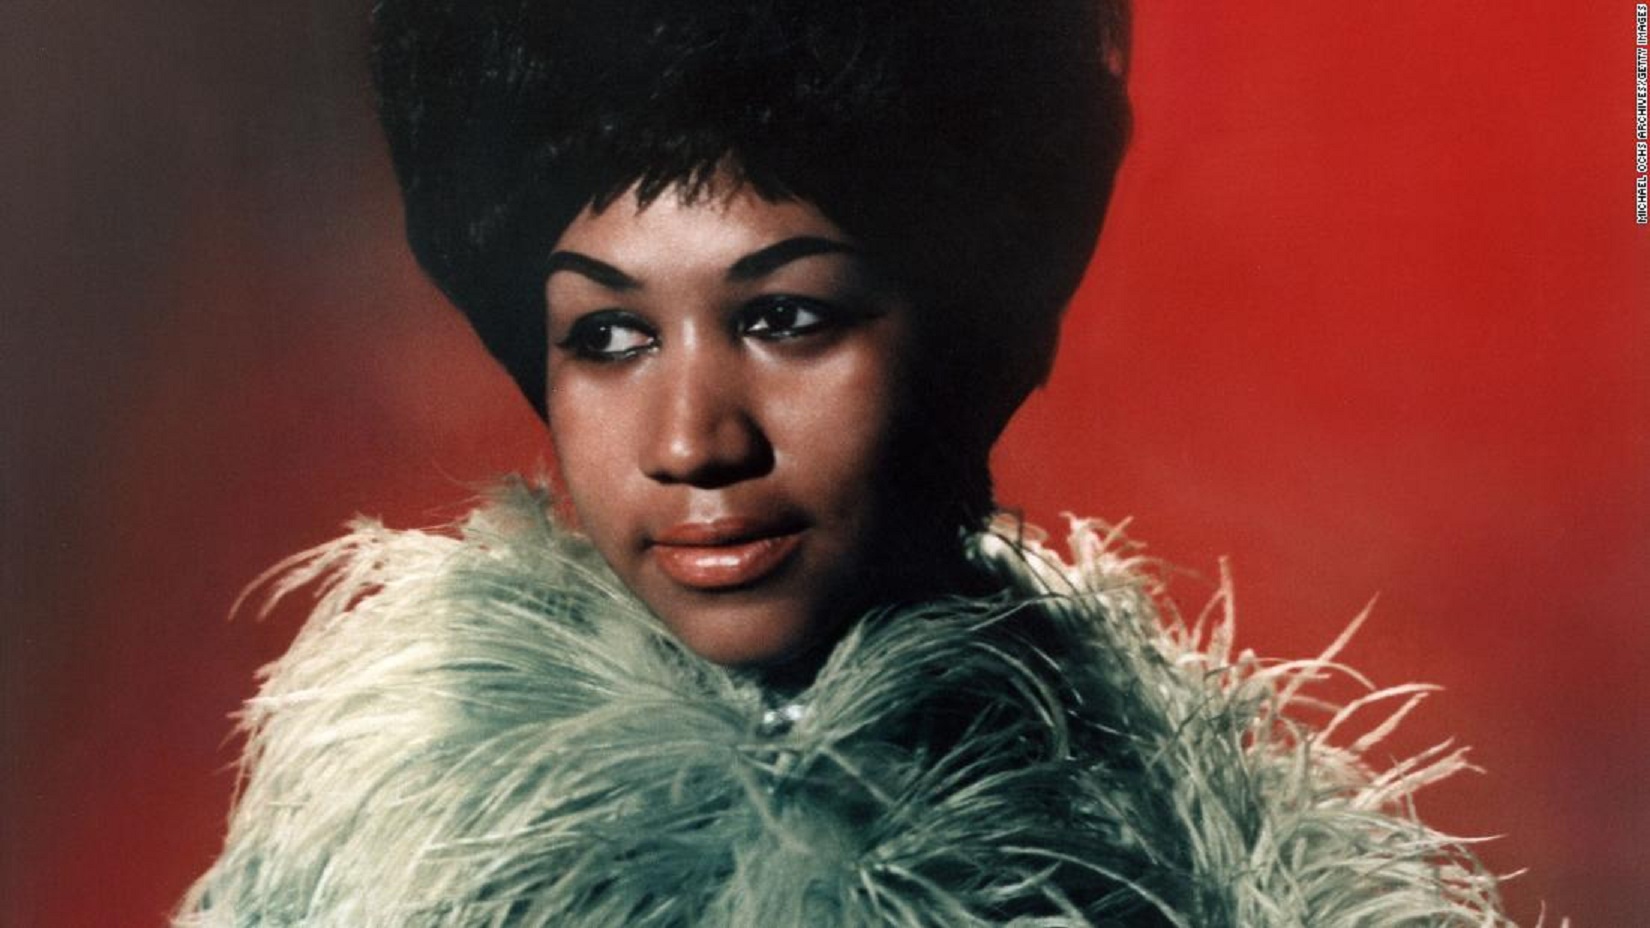 Poll: Vote for Aretha Franklin’s Very Best Song among her Top 40 Billboard Hits!